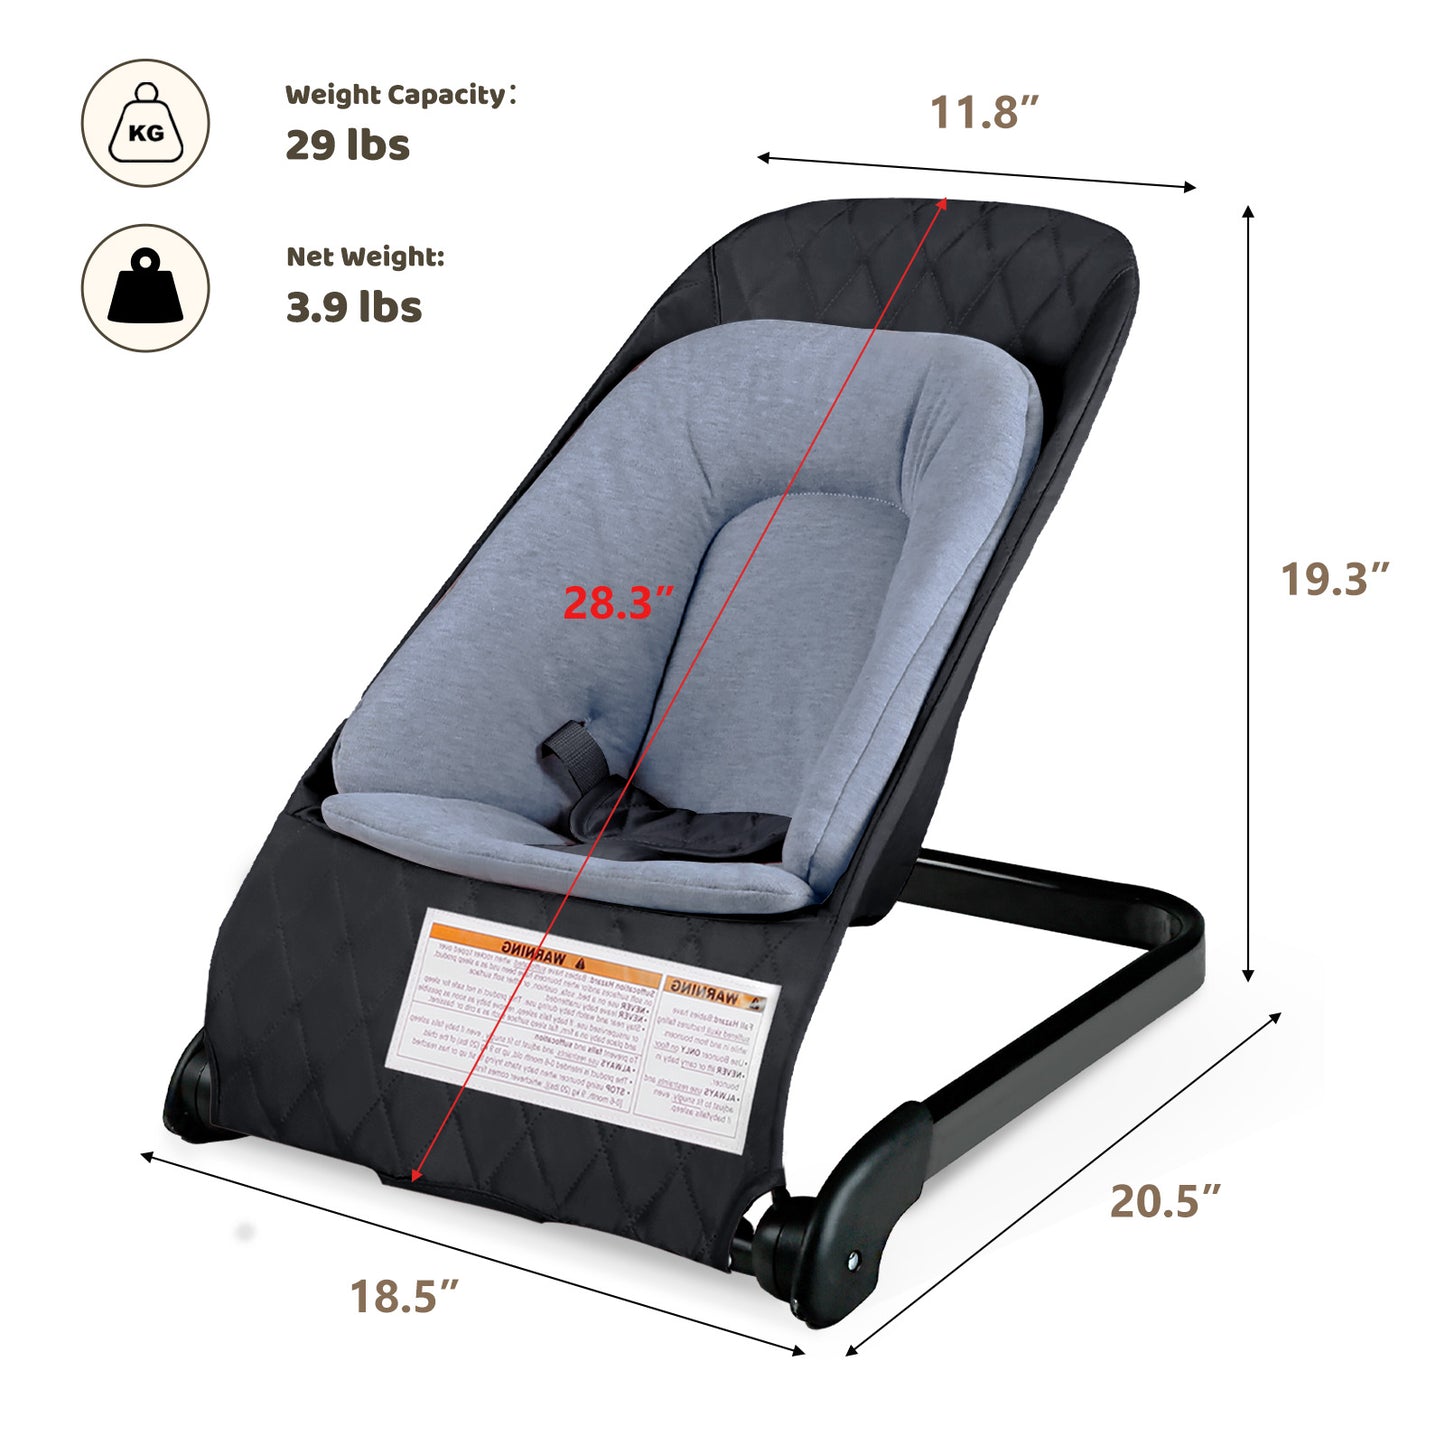 Baby Bouncer for Infants 3 in 1 Folding Baby Rocker Seat Unisex Lounge Chair, Black